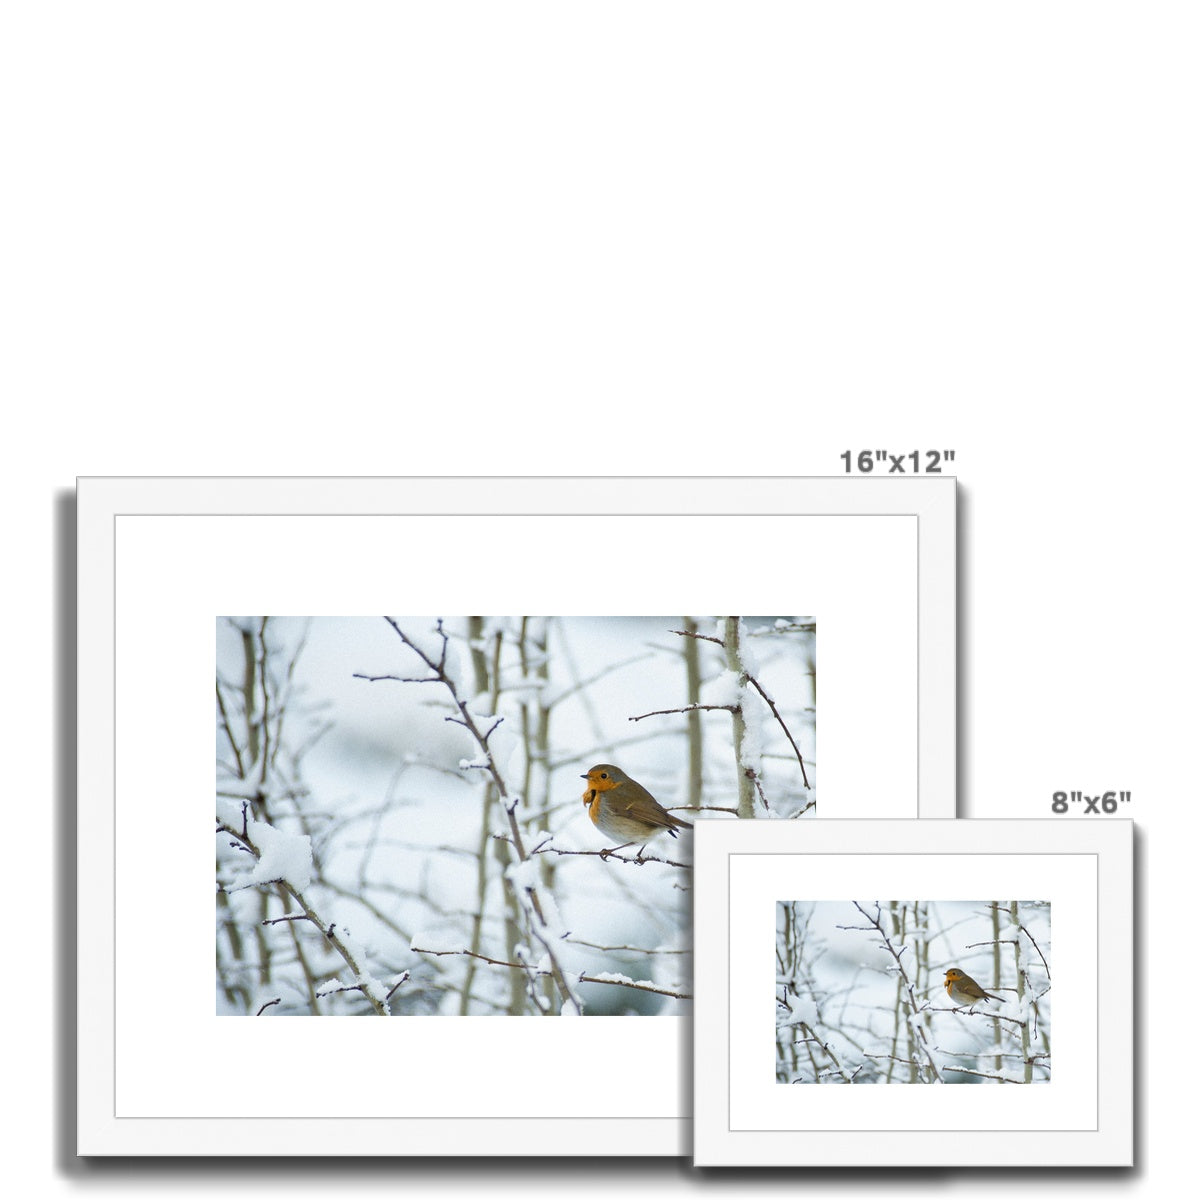 Robin perched on a snow covered tree branch Framed & Mounted Print